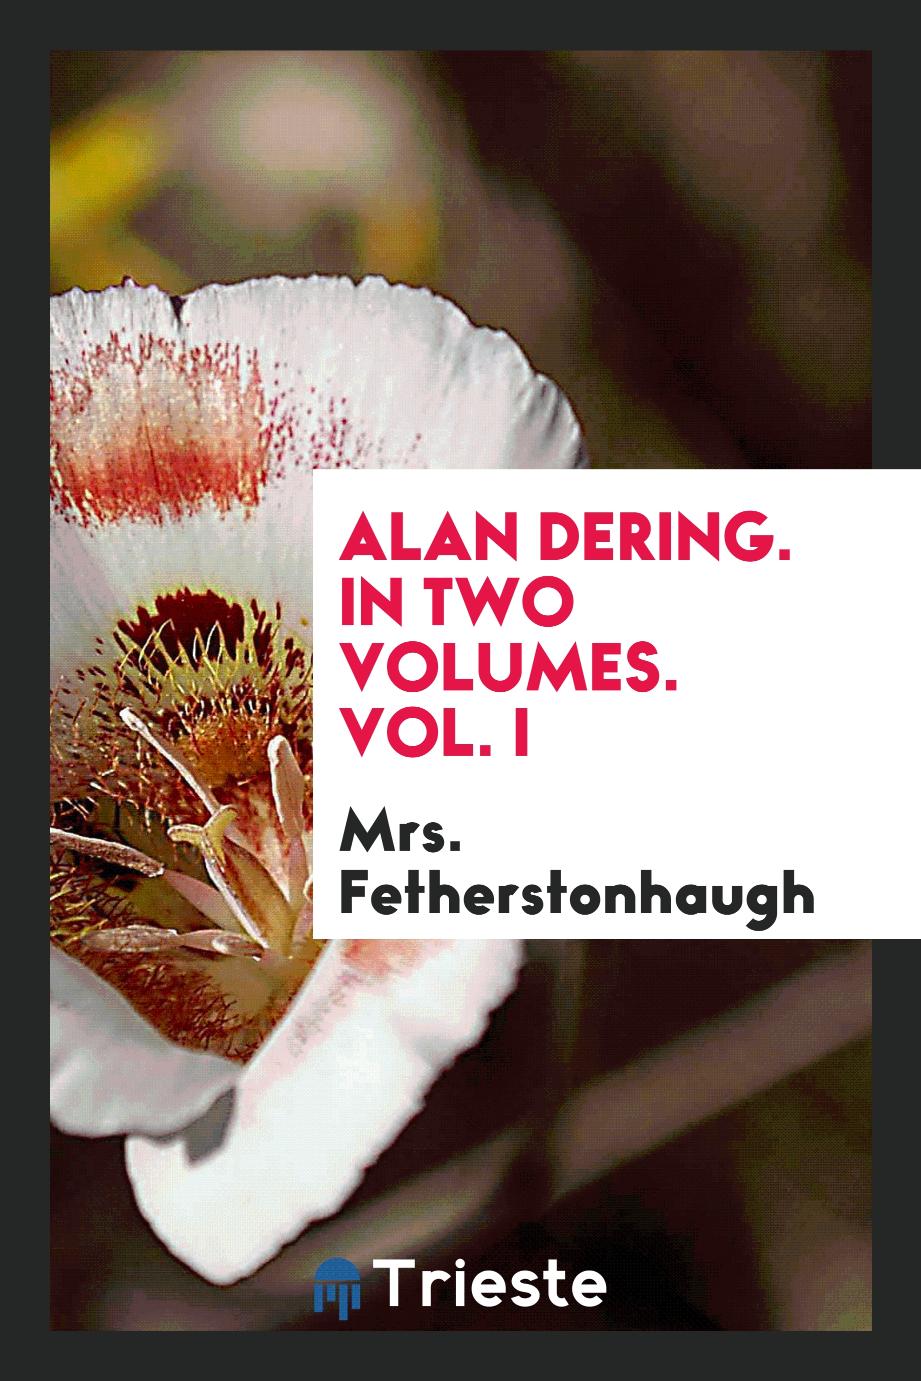 Alan Dering. In two volumes. Vol. I